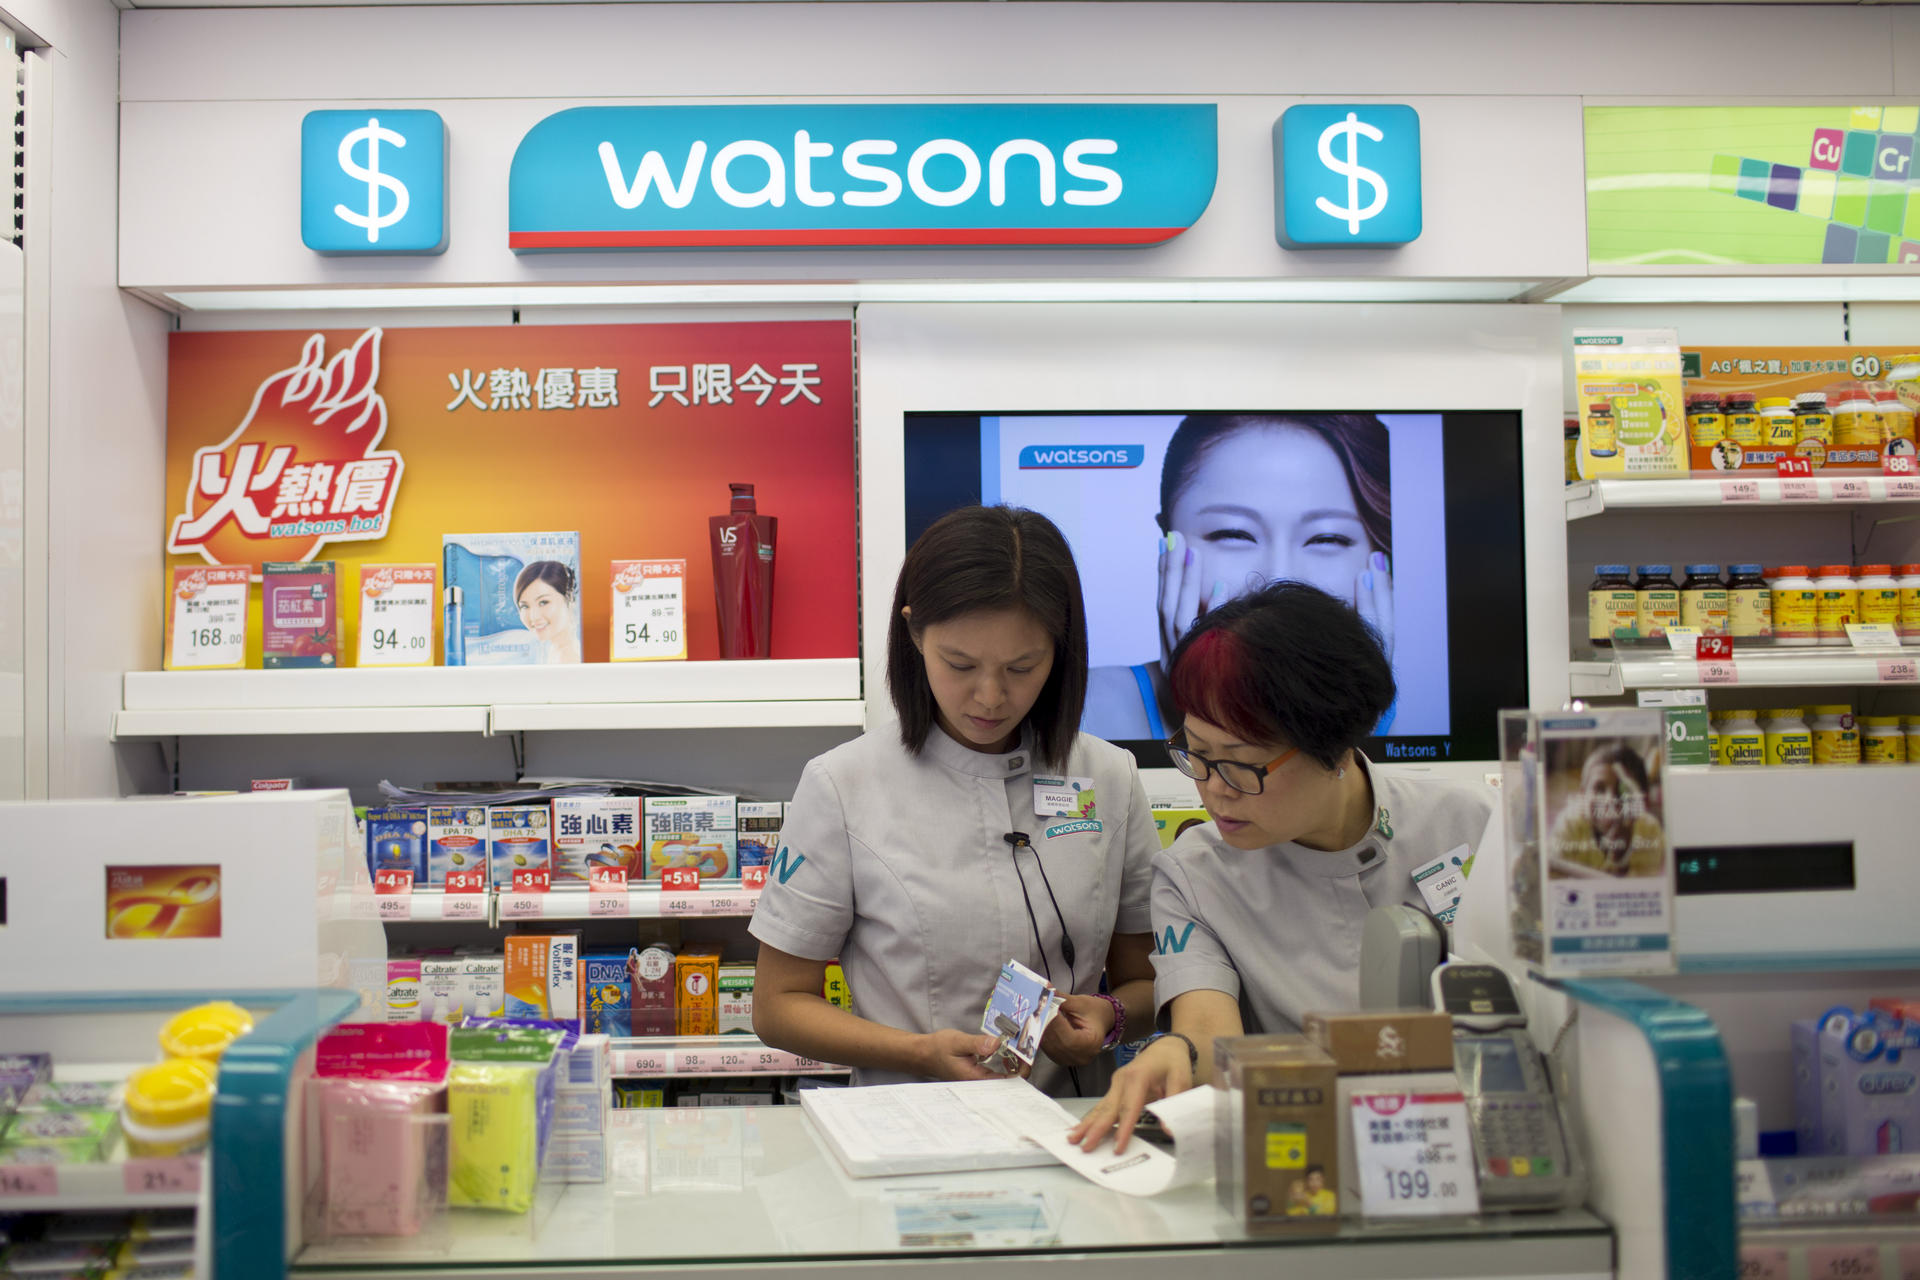 Analysts want an update on Hutchison Whampoa's plan to spin off AS Watson, which operates 11,400 Watsons stores. Photo: Bloomberg